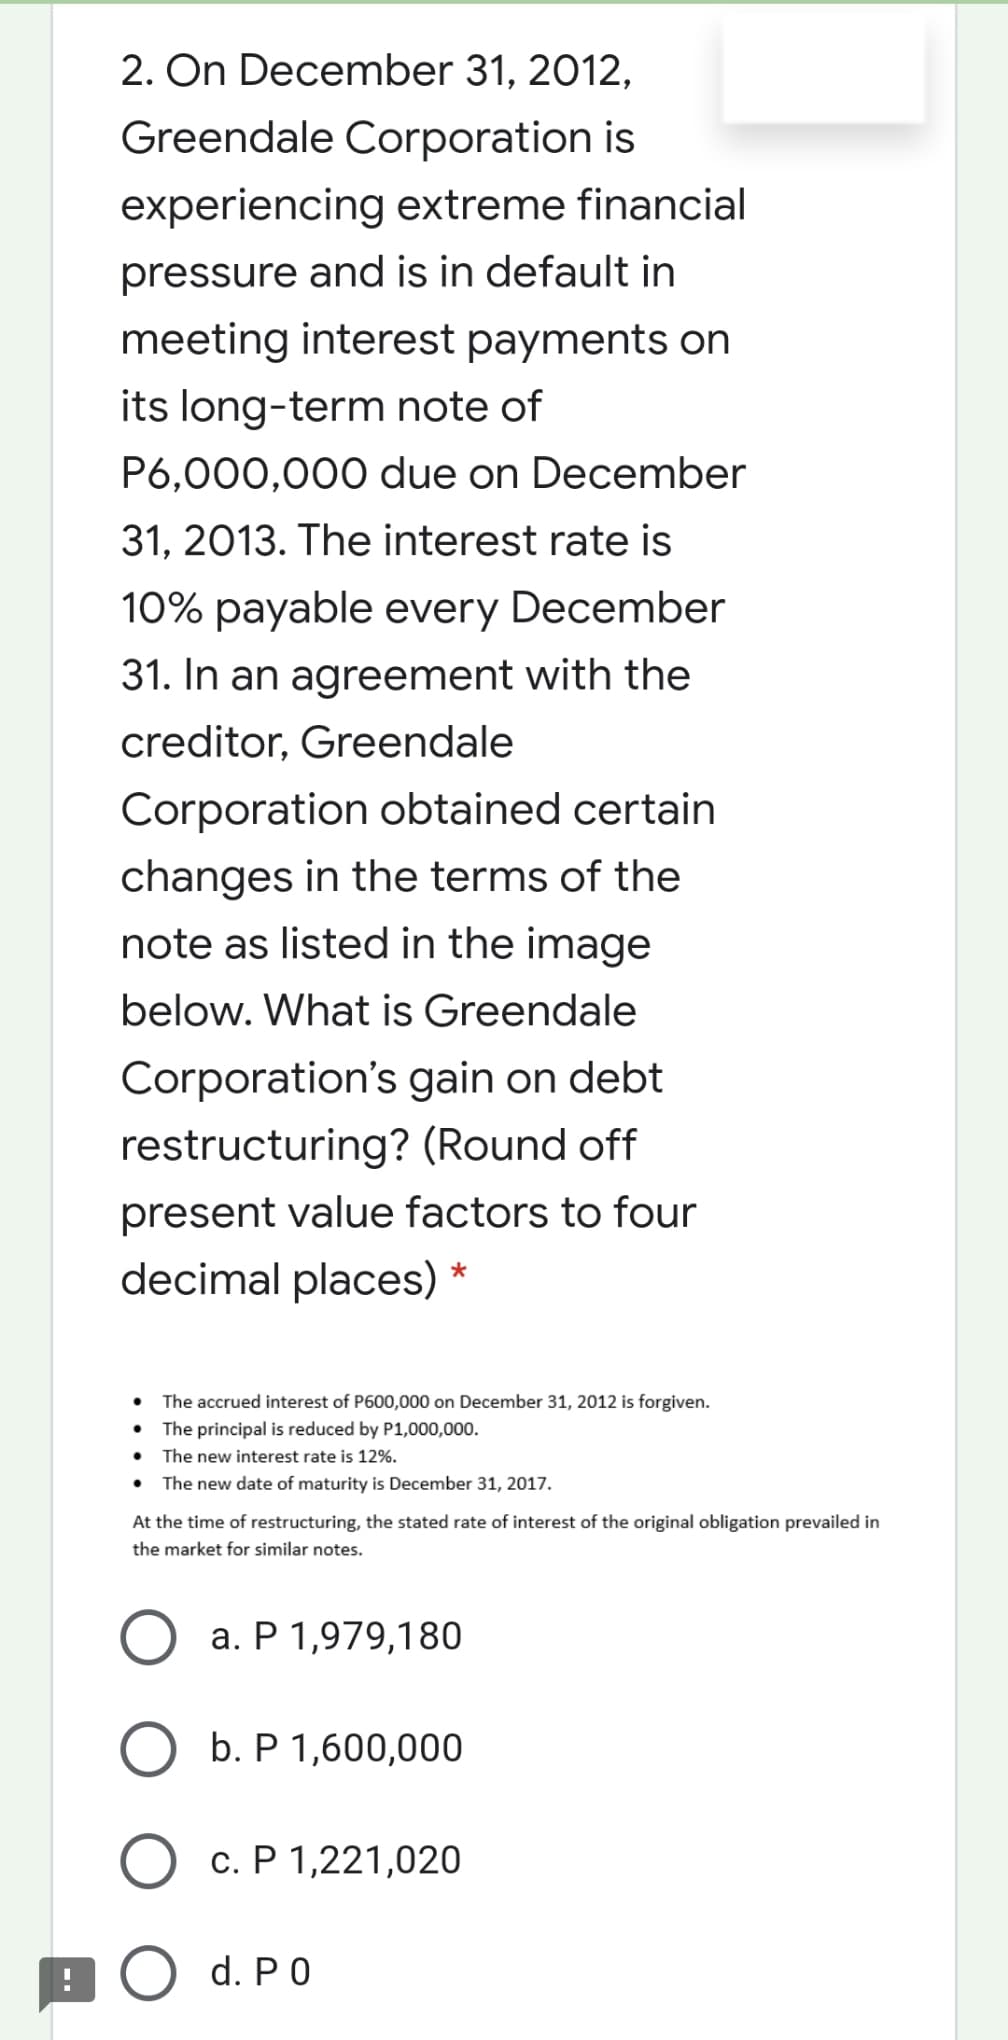 2. On December 31, 2012,
Greendale Corporation is
experiencing extreme financial
pressure and is in default in
meeting interest payments on
its long-term note of
P6,000,000 due on December
31, 2013. The interest rate is
10% payable every December
31. In an agreement with the
creditor, Greendale
Corporation obtained certain
changes in the terms of the
note as listed in the image
below. What is Greendale
Corporation's gain on debt
restructuring? (Round off
present value factors to four
decimal places)
• The accrued interest of P600,000 on December 31, 2012 is forgiven.
• The principal is reduced by P1,000,000.
• The new interest rate is 12%.
• The new date of maturity is December 31, 2017.
At the time of restructuring, the stated rate of interest of the original obligation prevailed in
the market for similar notes.
a. P 1,979,180
O b. P 1,600,000
O c. P 1,221,020
BO d. PO
